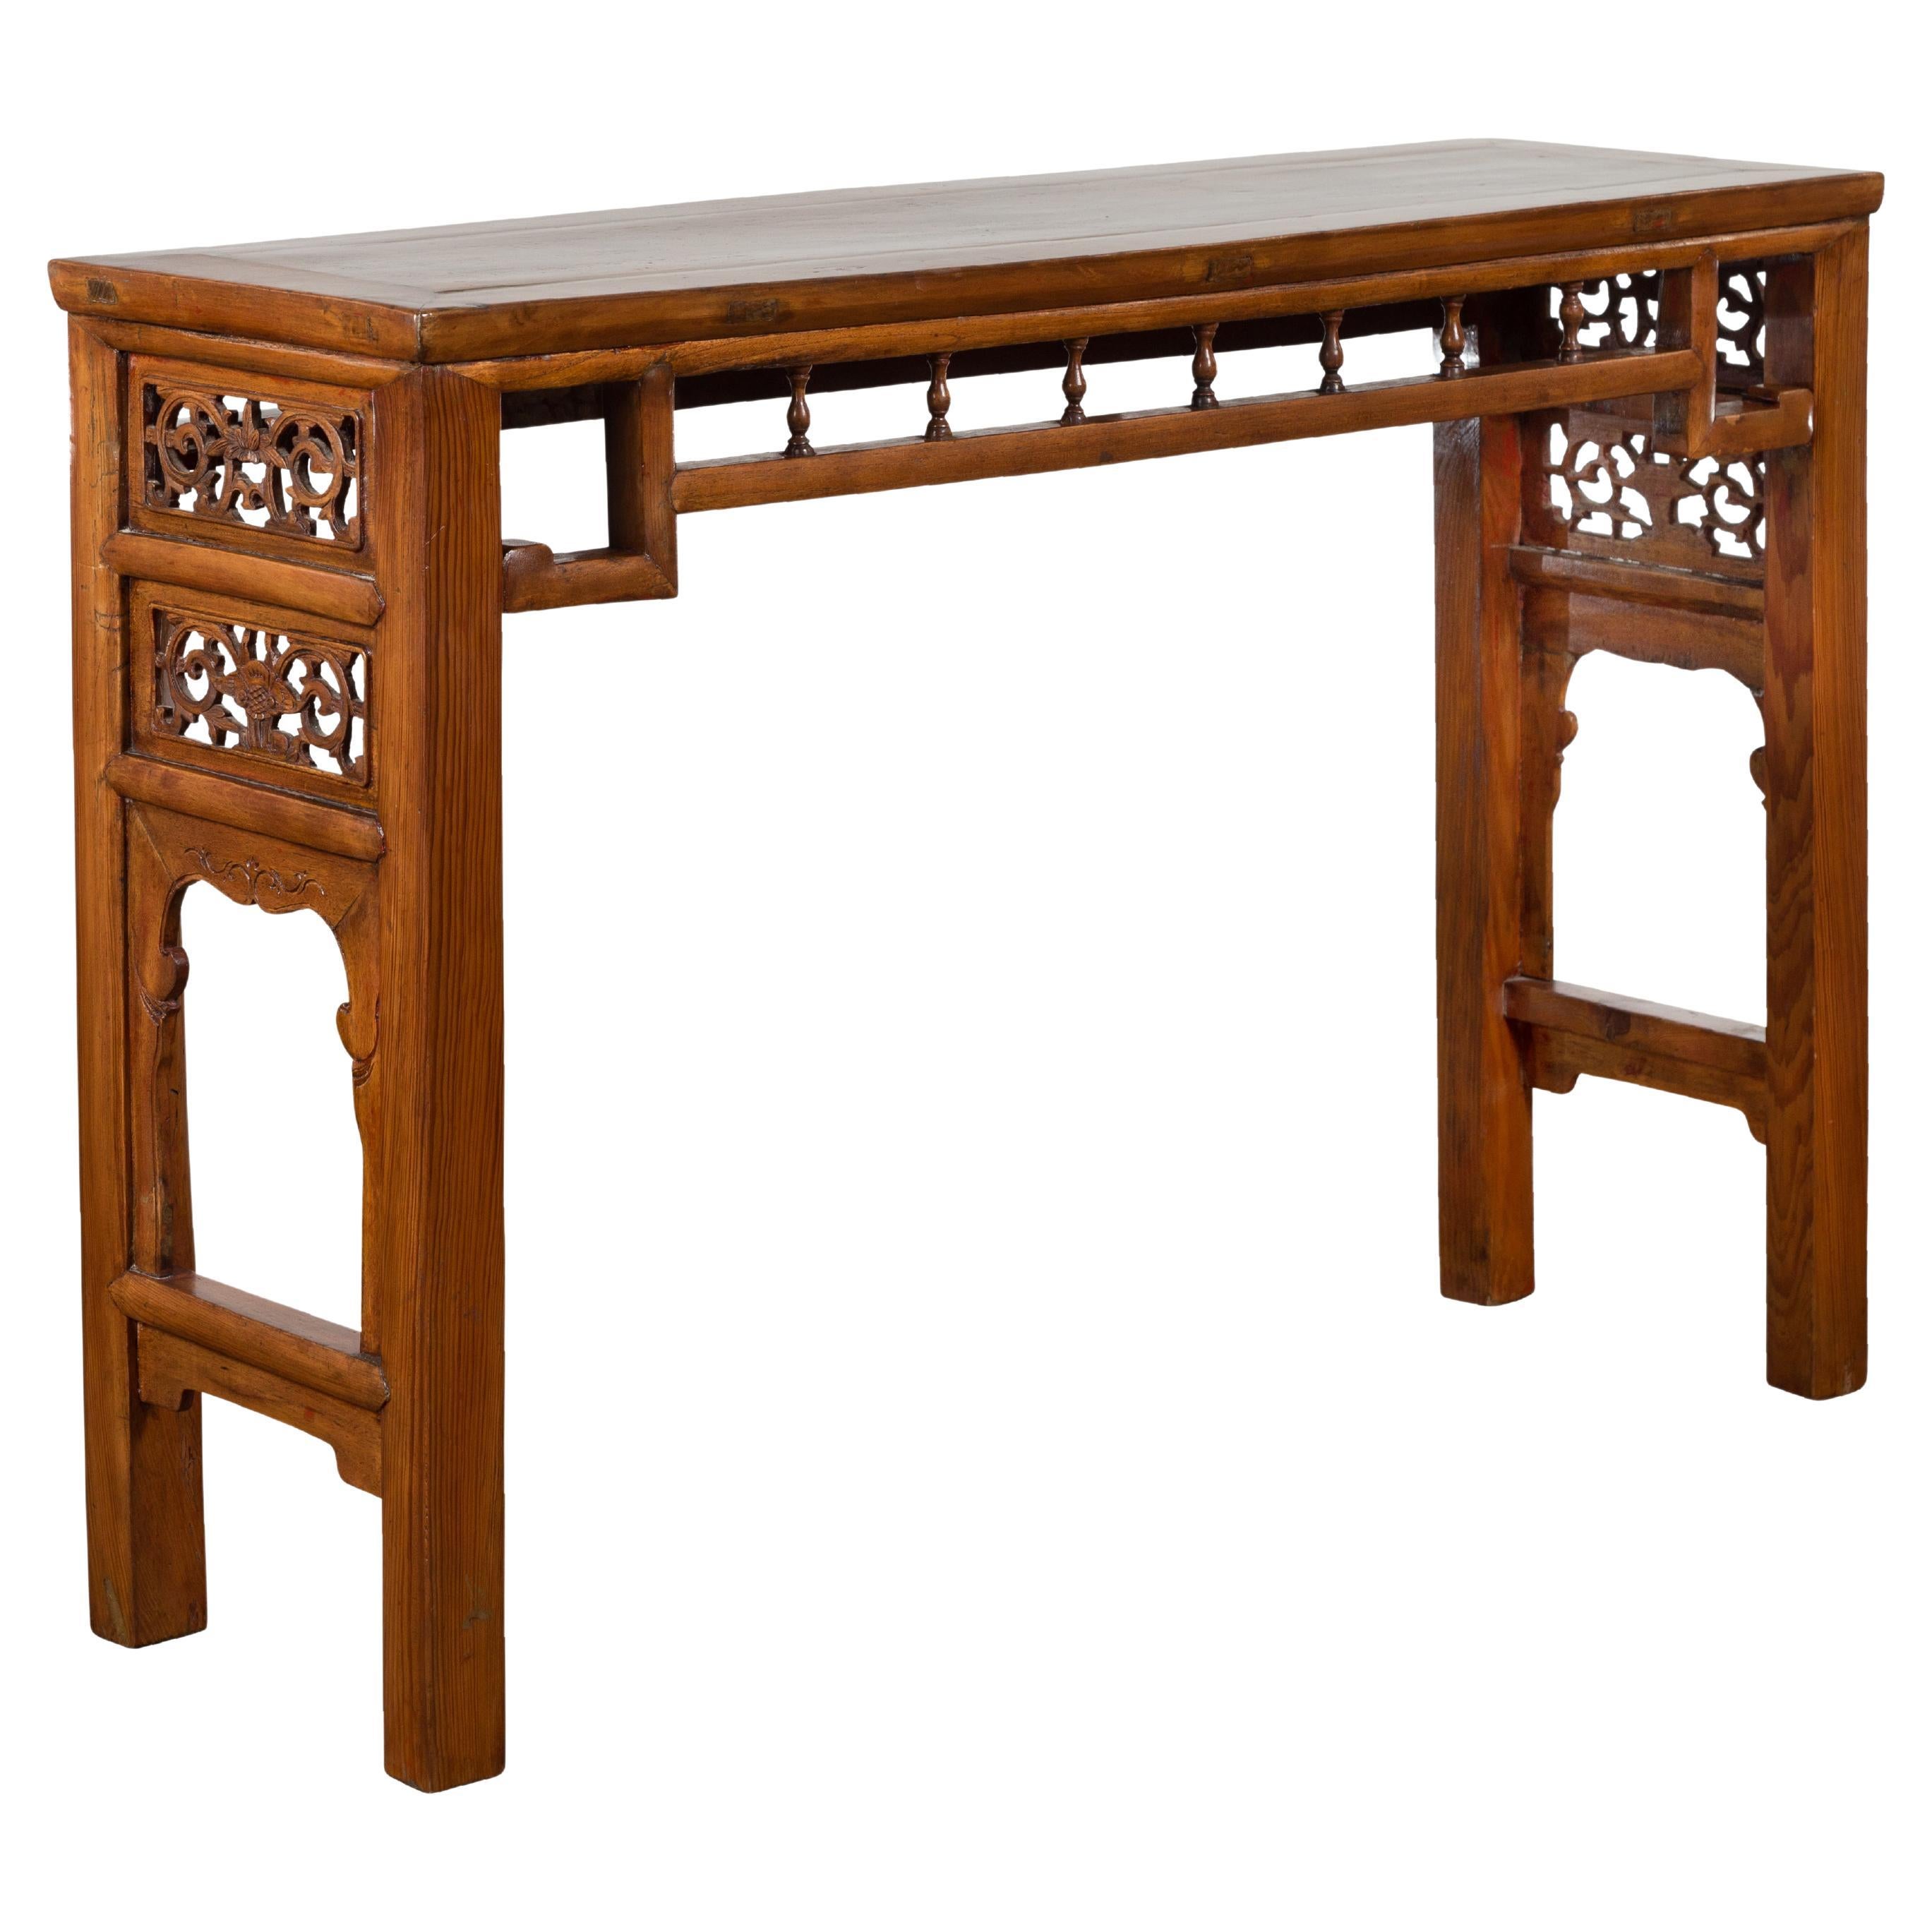 Chinese Late Qing Dynasty Altar Console Table with Foliage Carved Apron For Sale